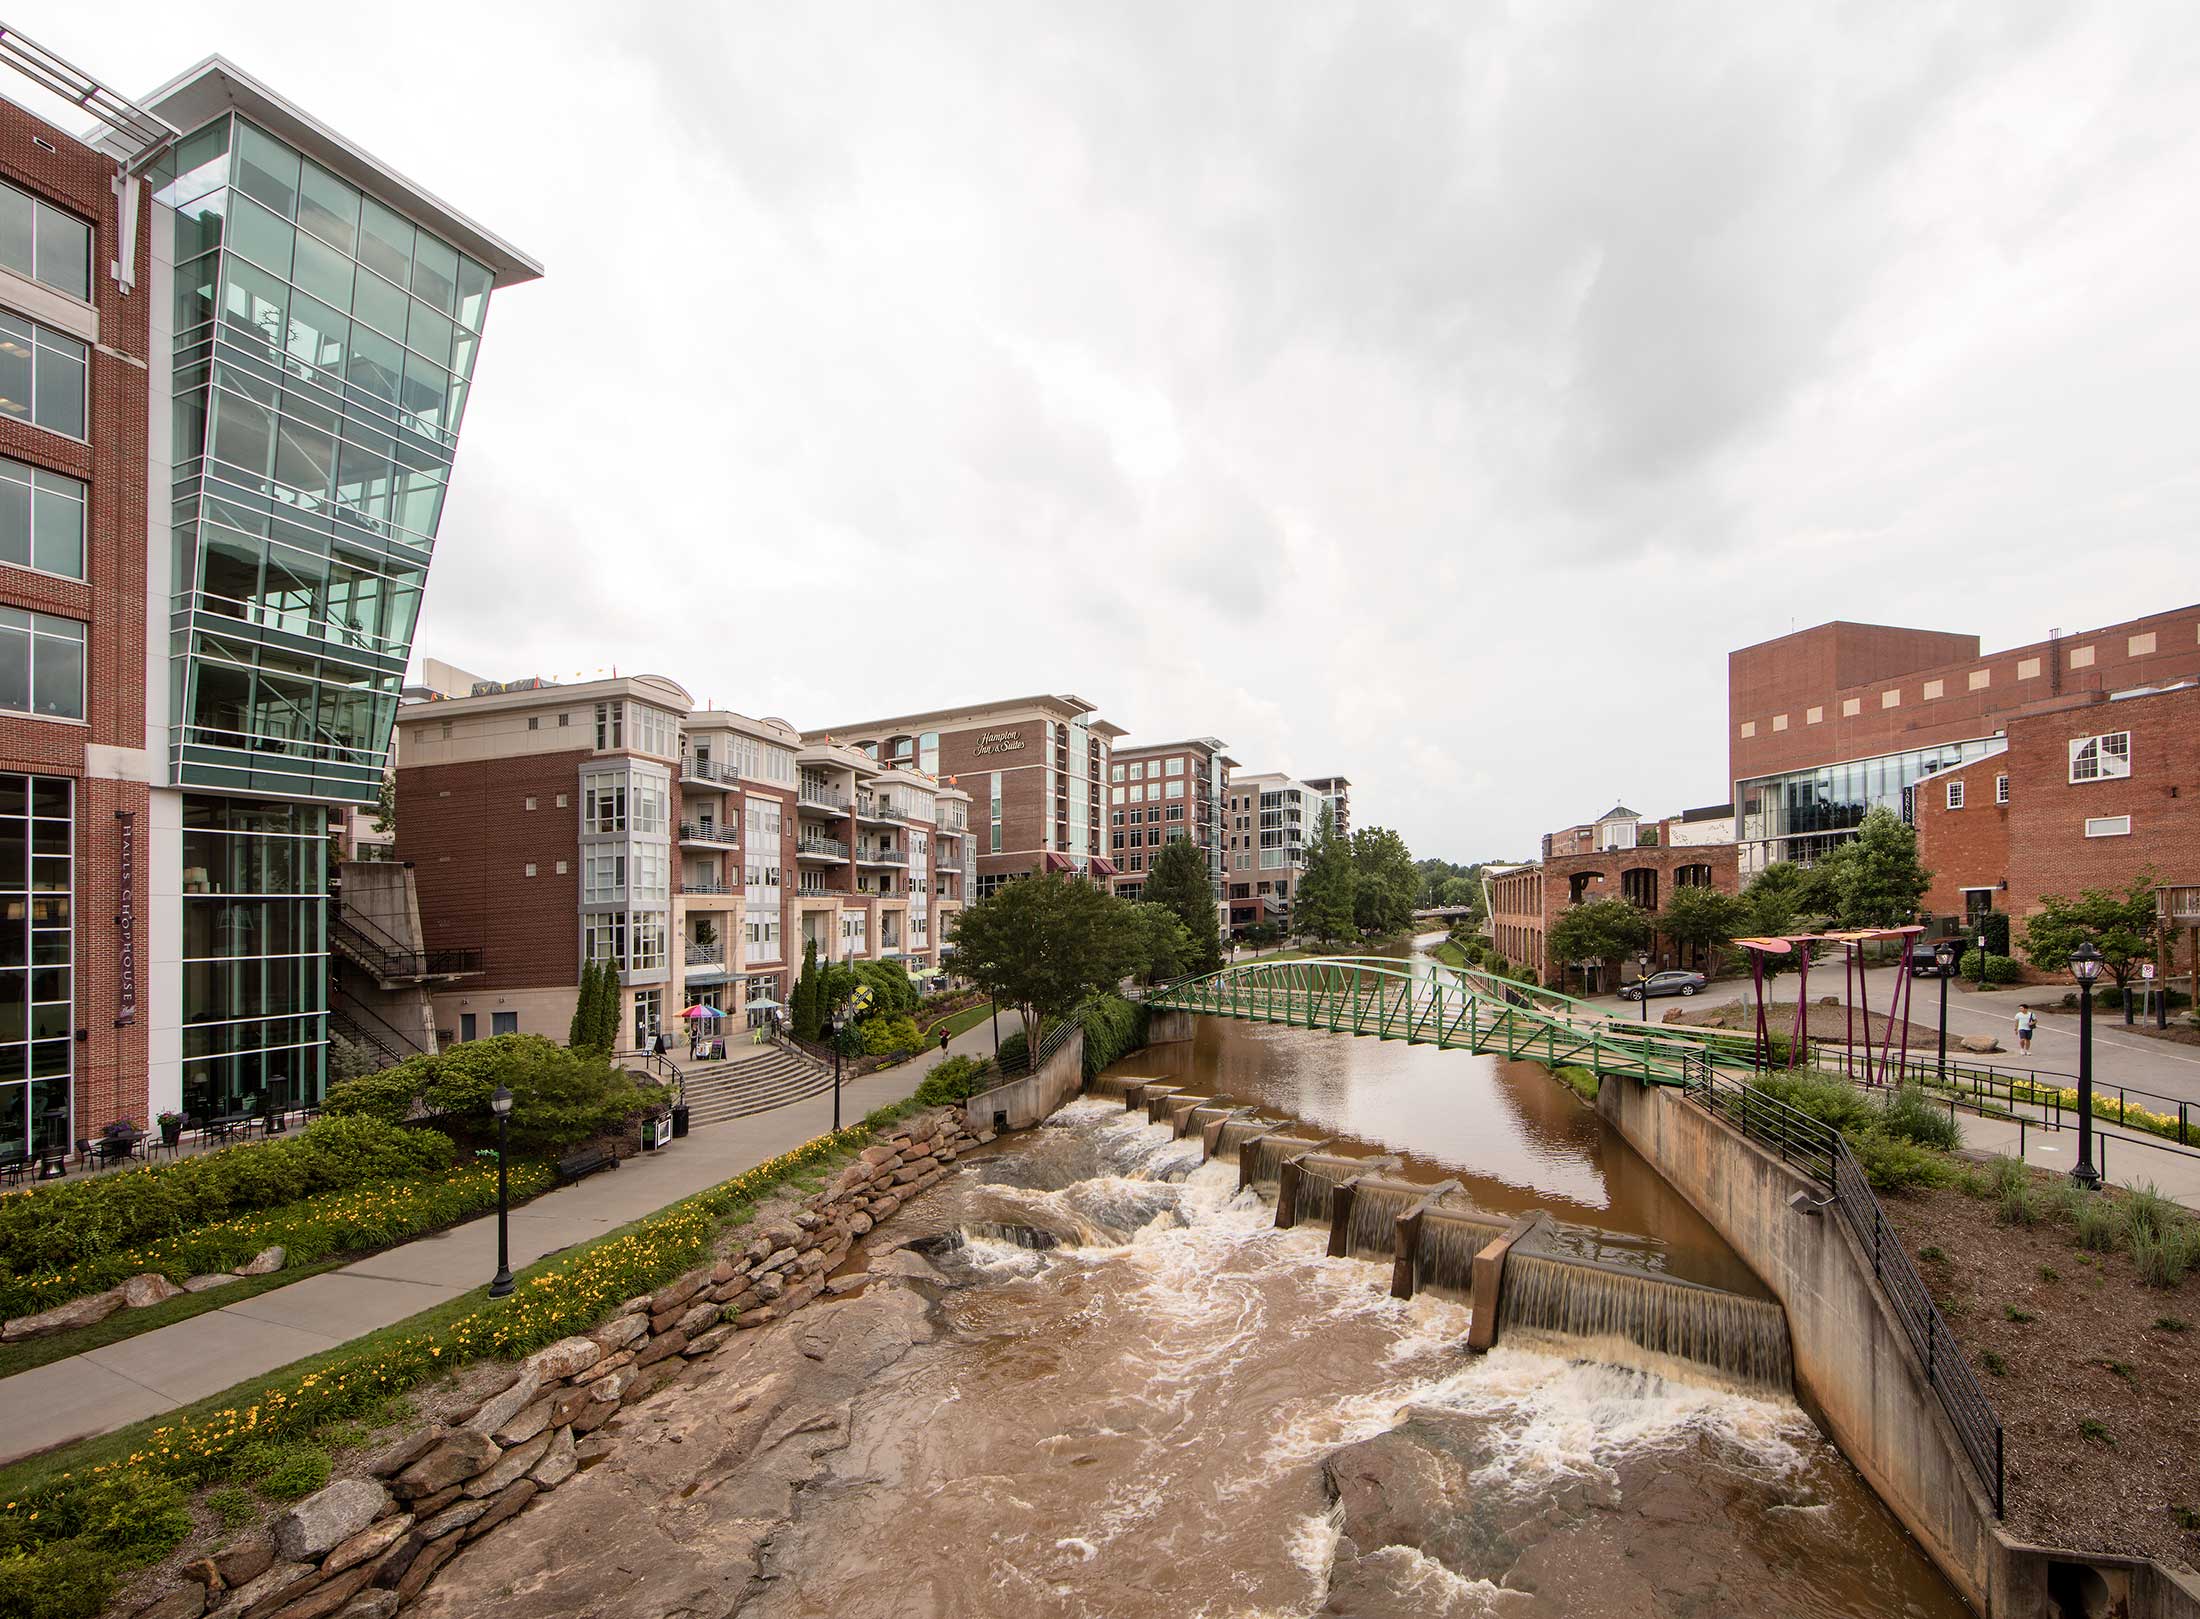 The spruced-up waterfront in Greenville, S.C.